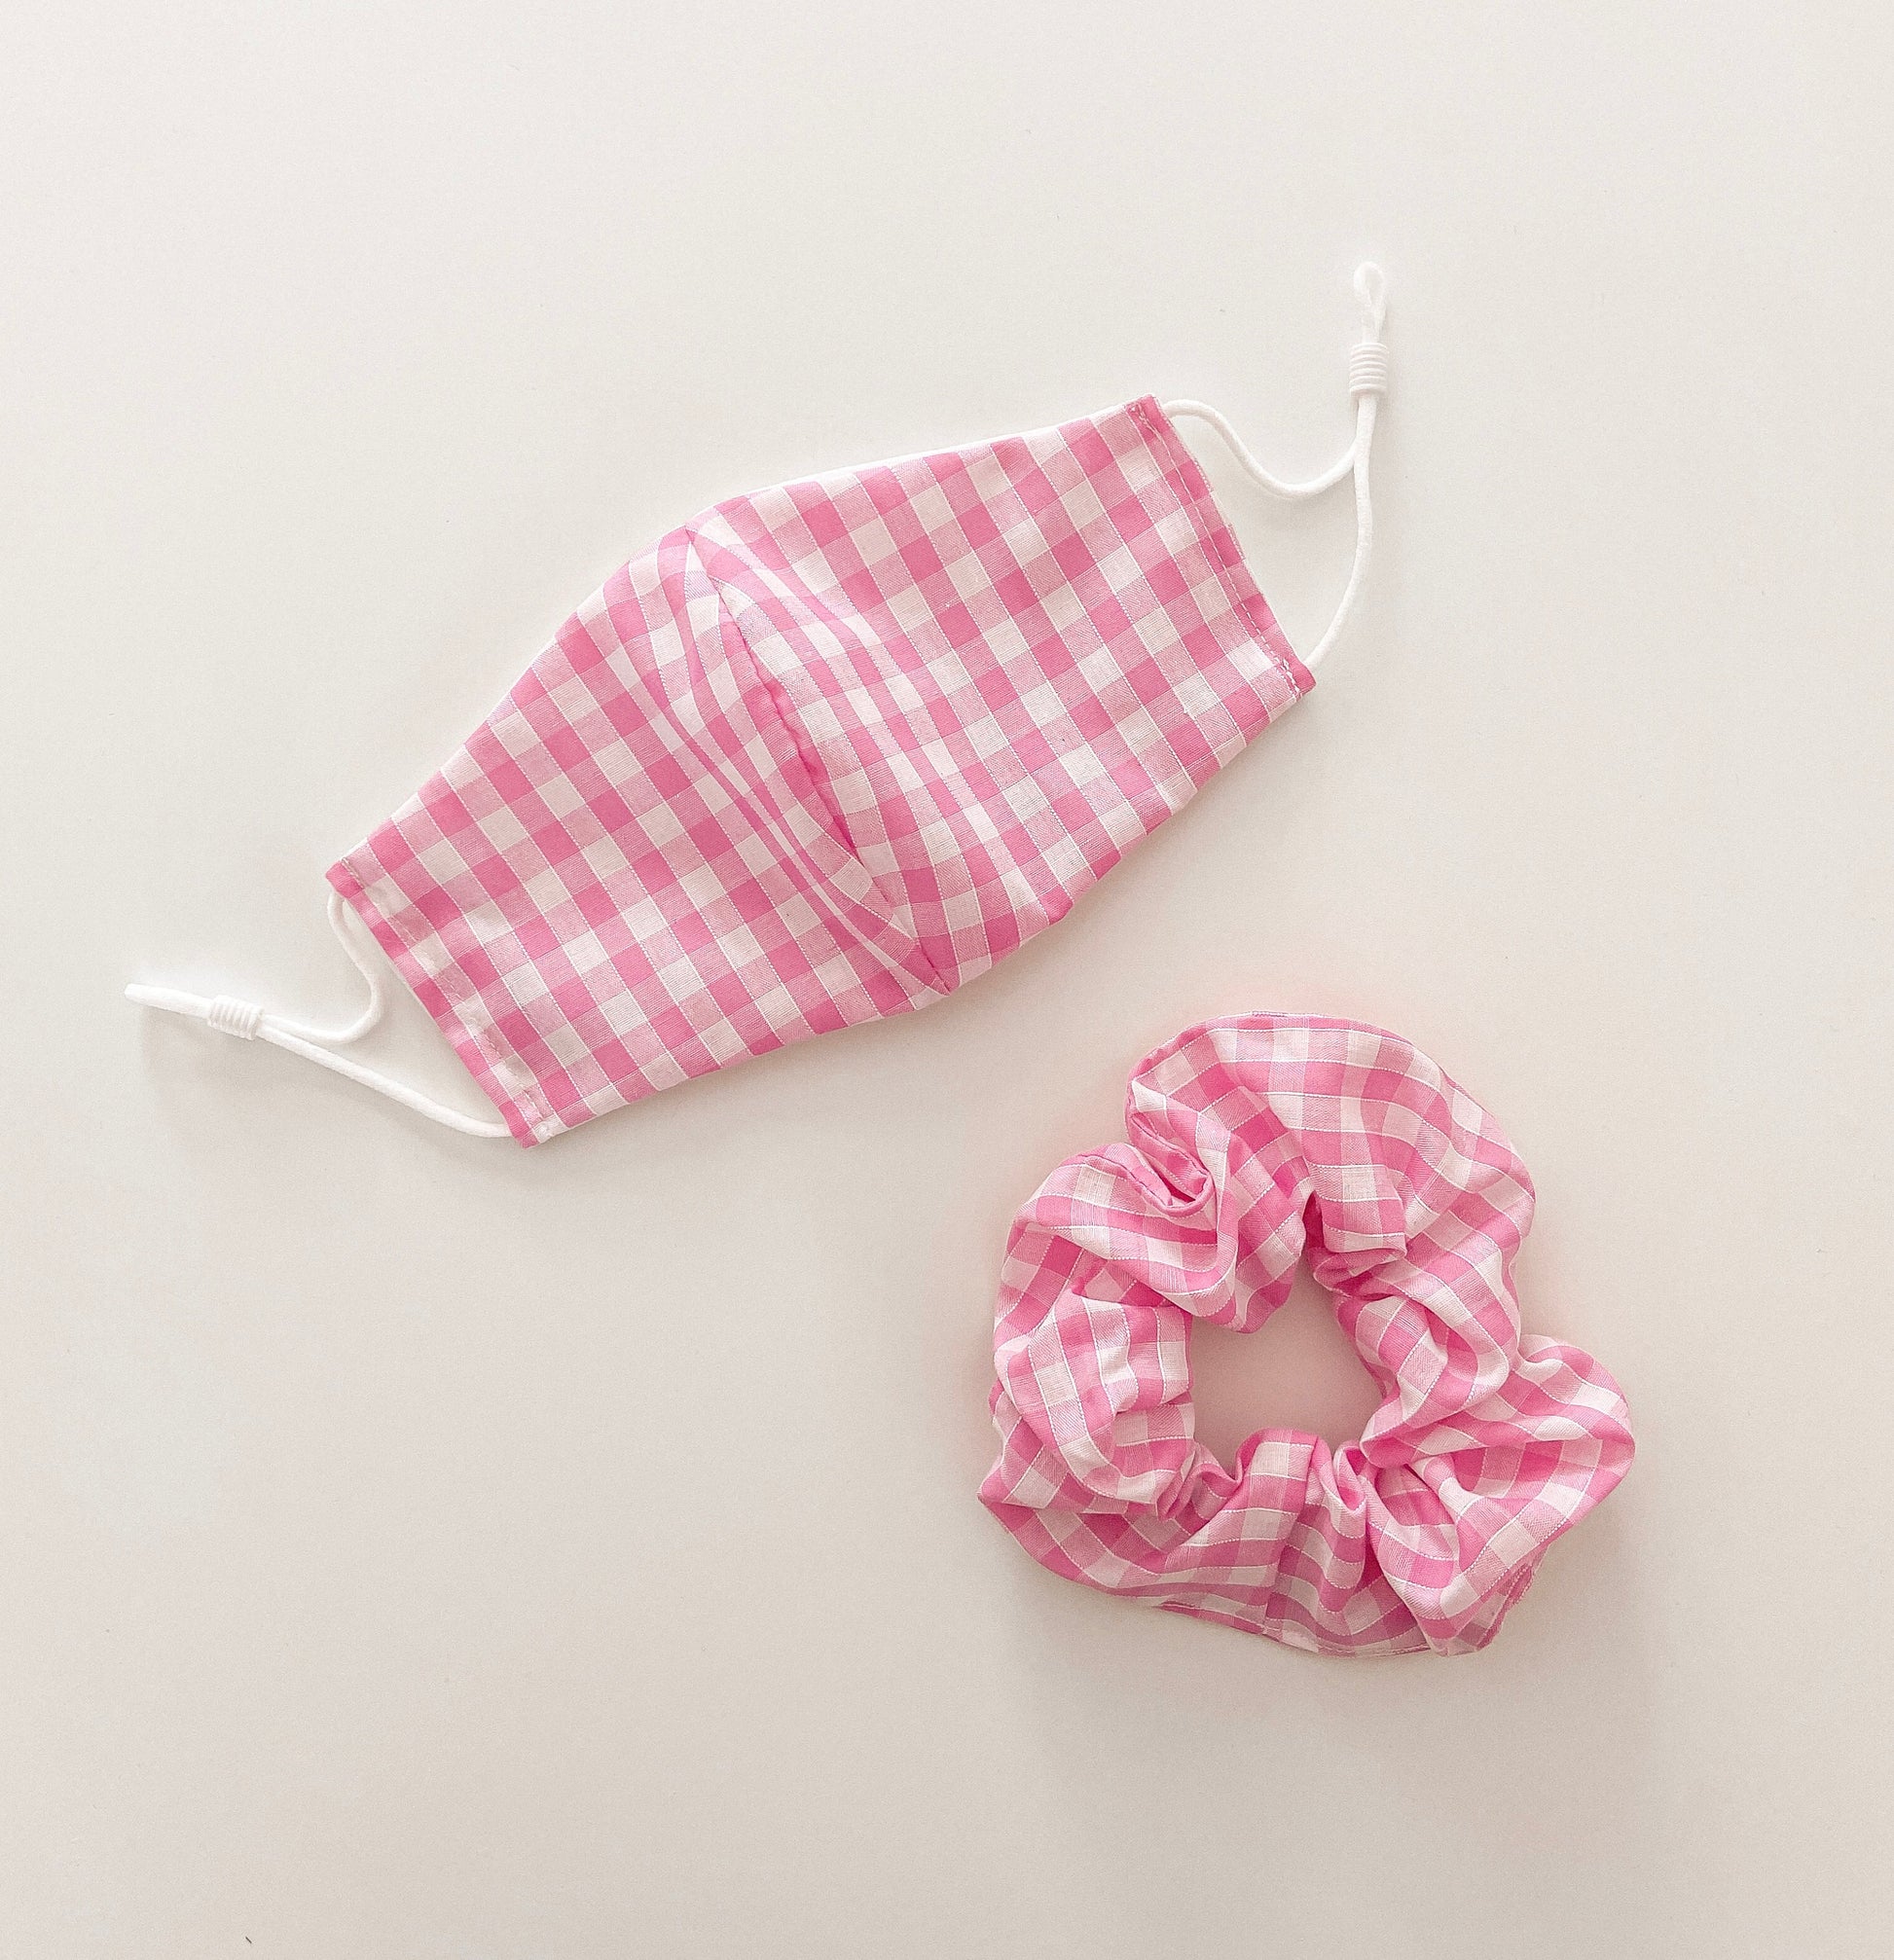 GINGHAM FLORAL REVERSIBLE 2 in 1 Mask Adjustable Super Soft Elastic. Washable Reusable homemade face mask and matching Scrunchy made in U.K.